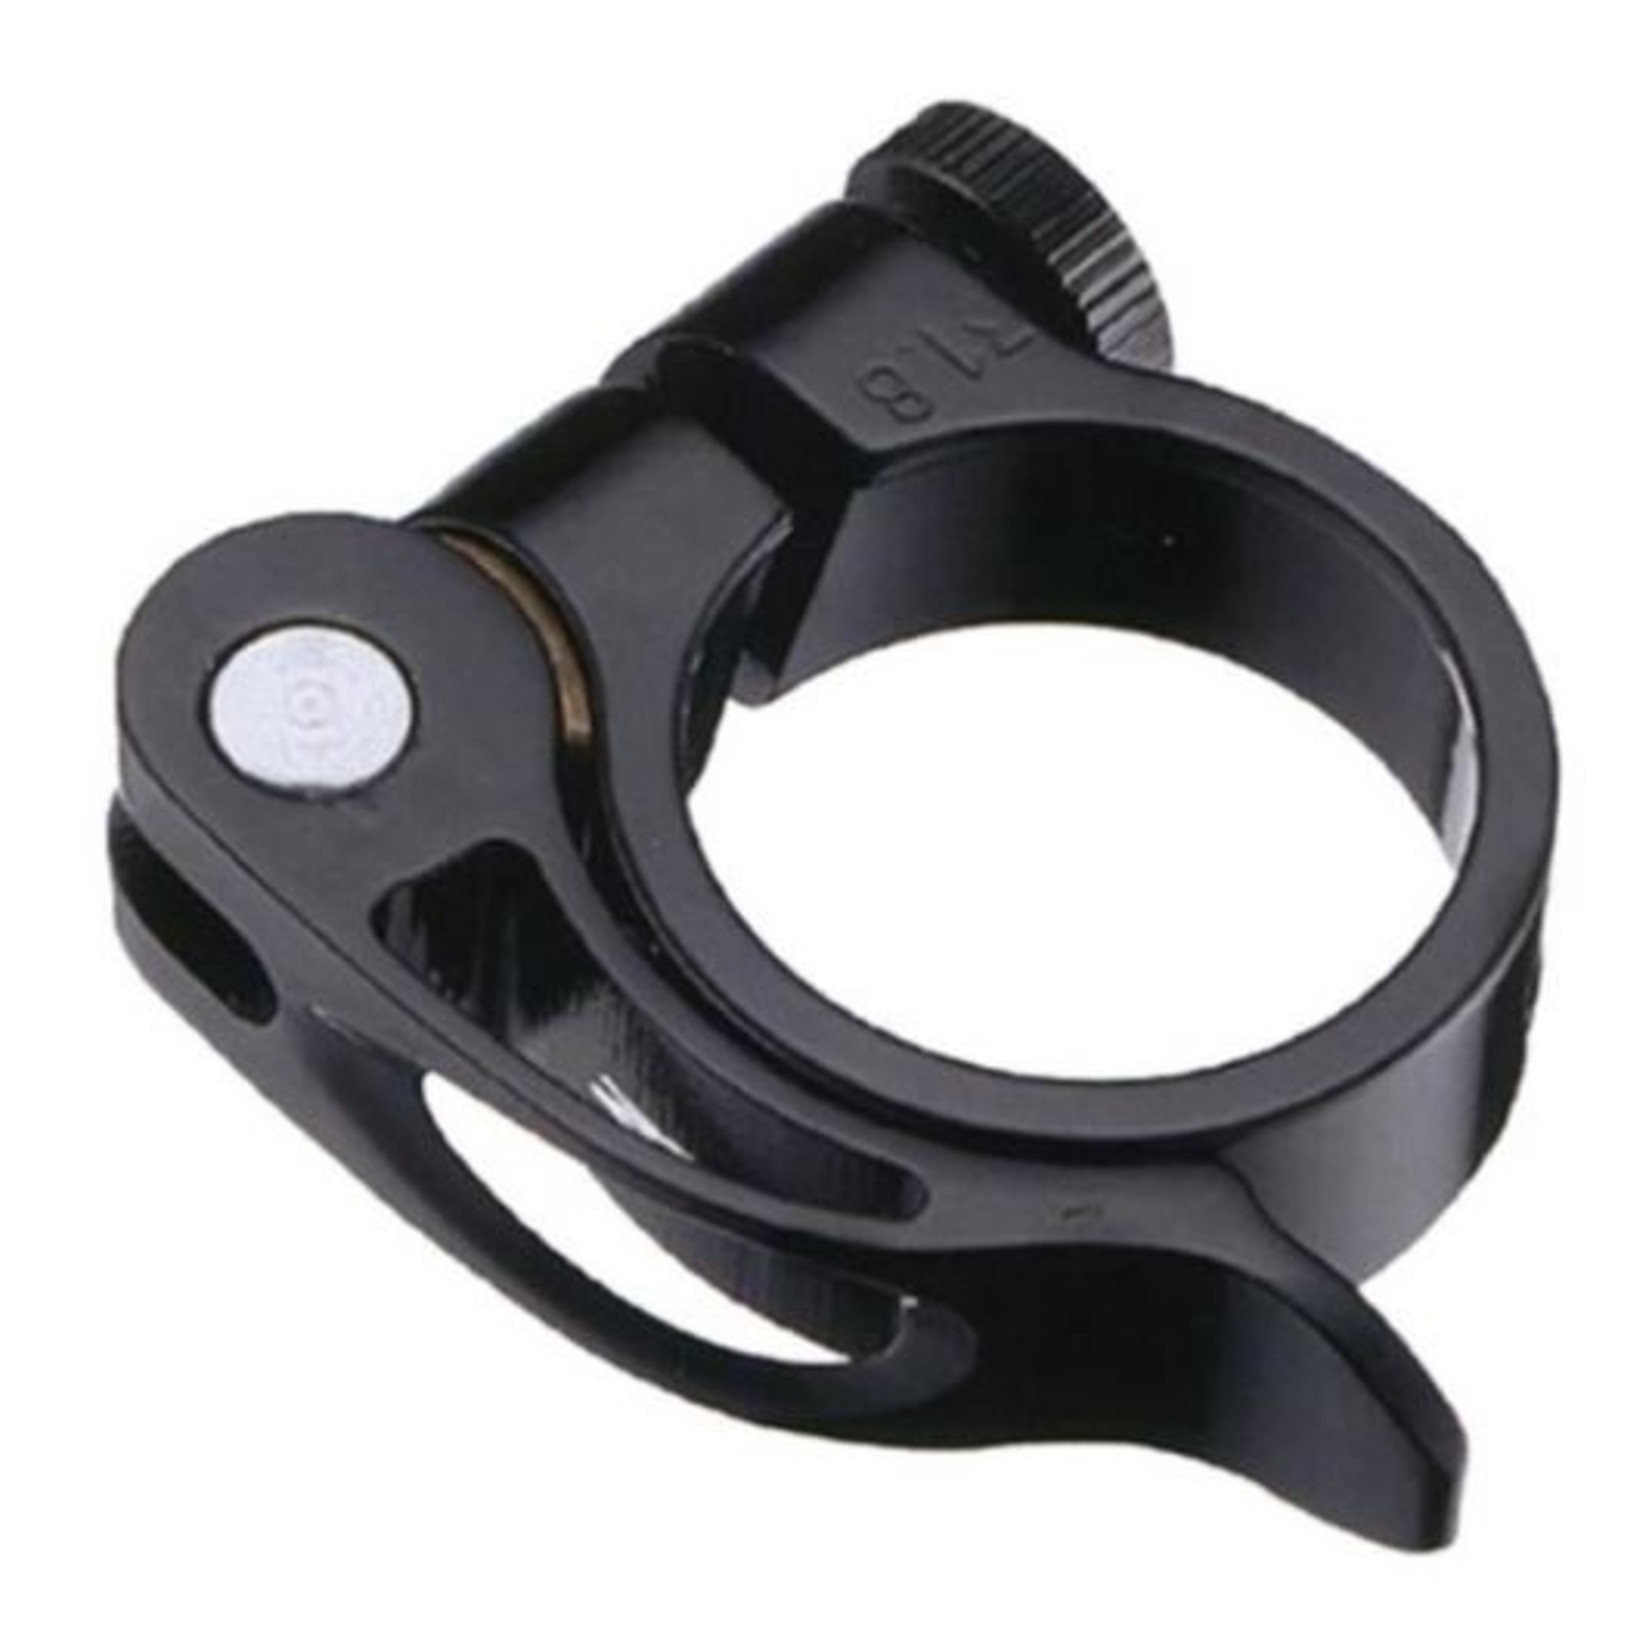 FD Kobe Bicycle Seat Post Clamp - 31.8mm